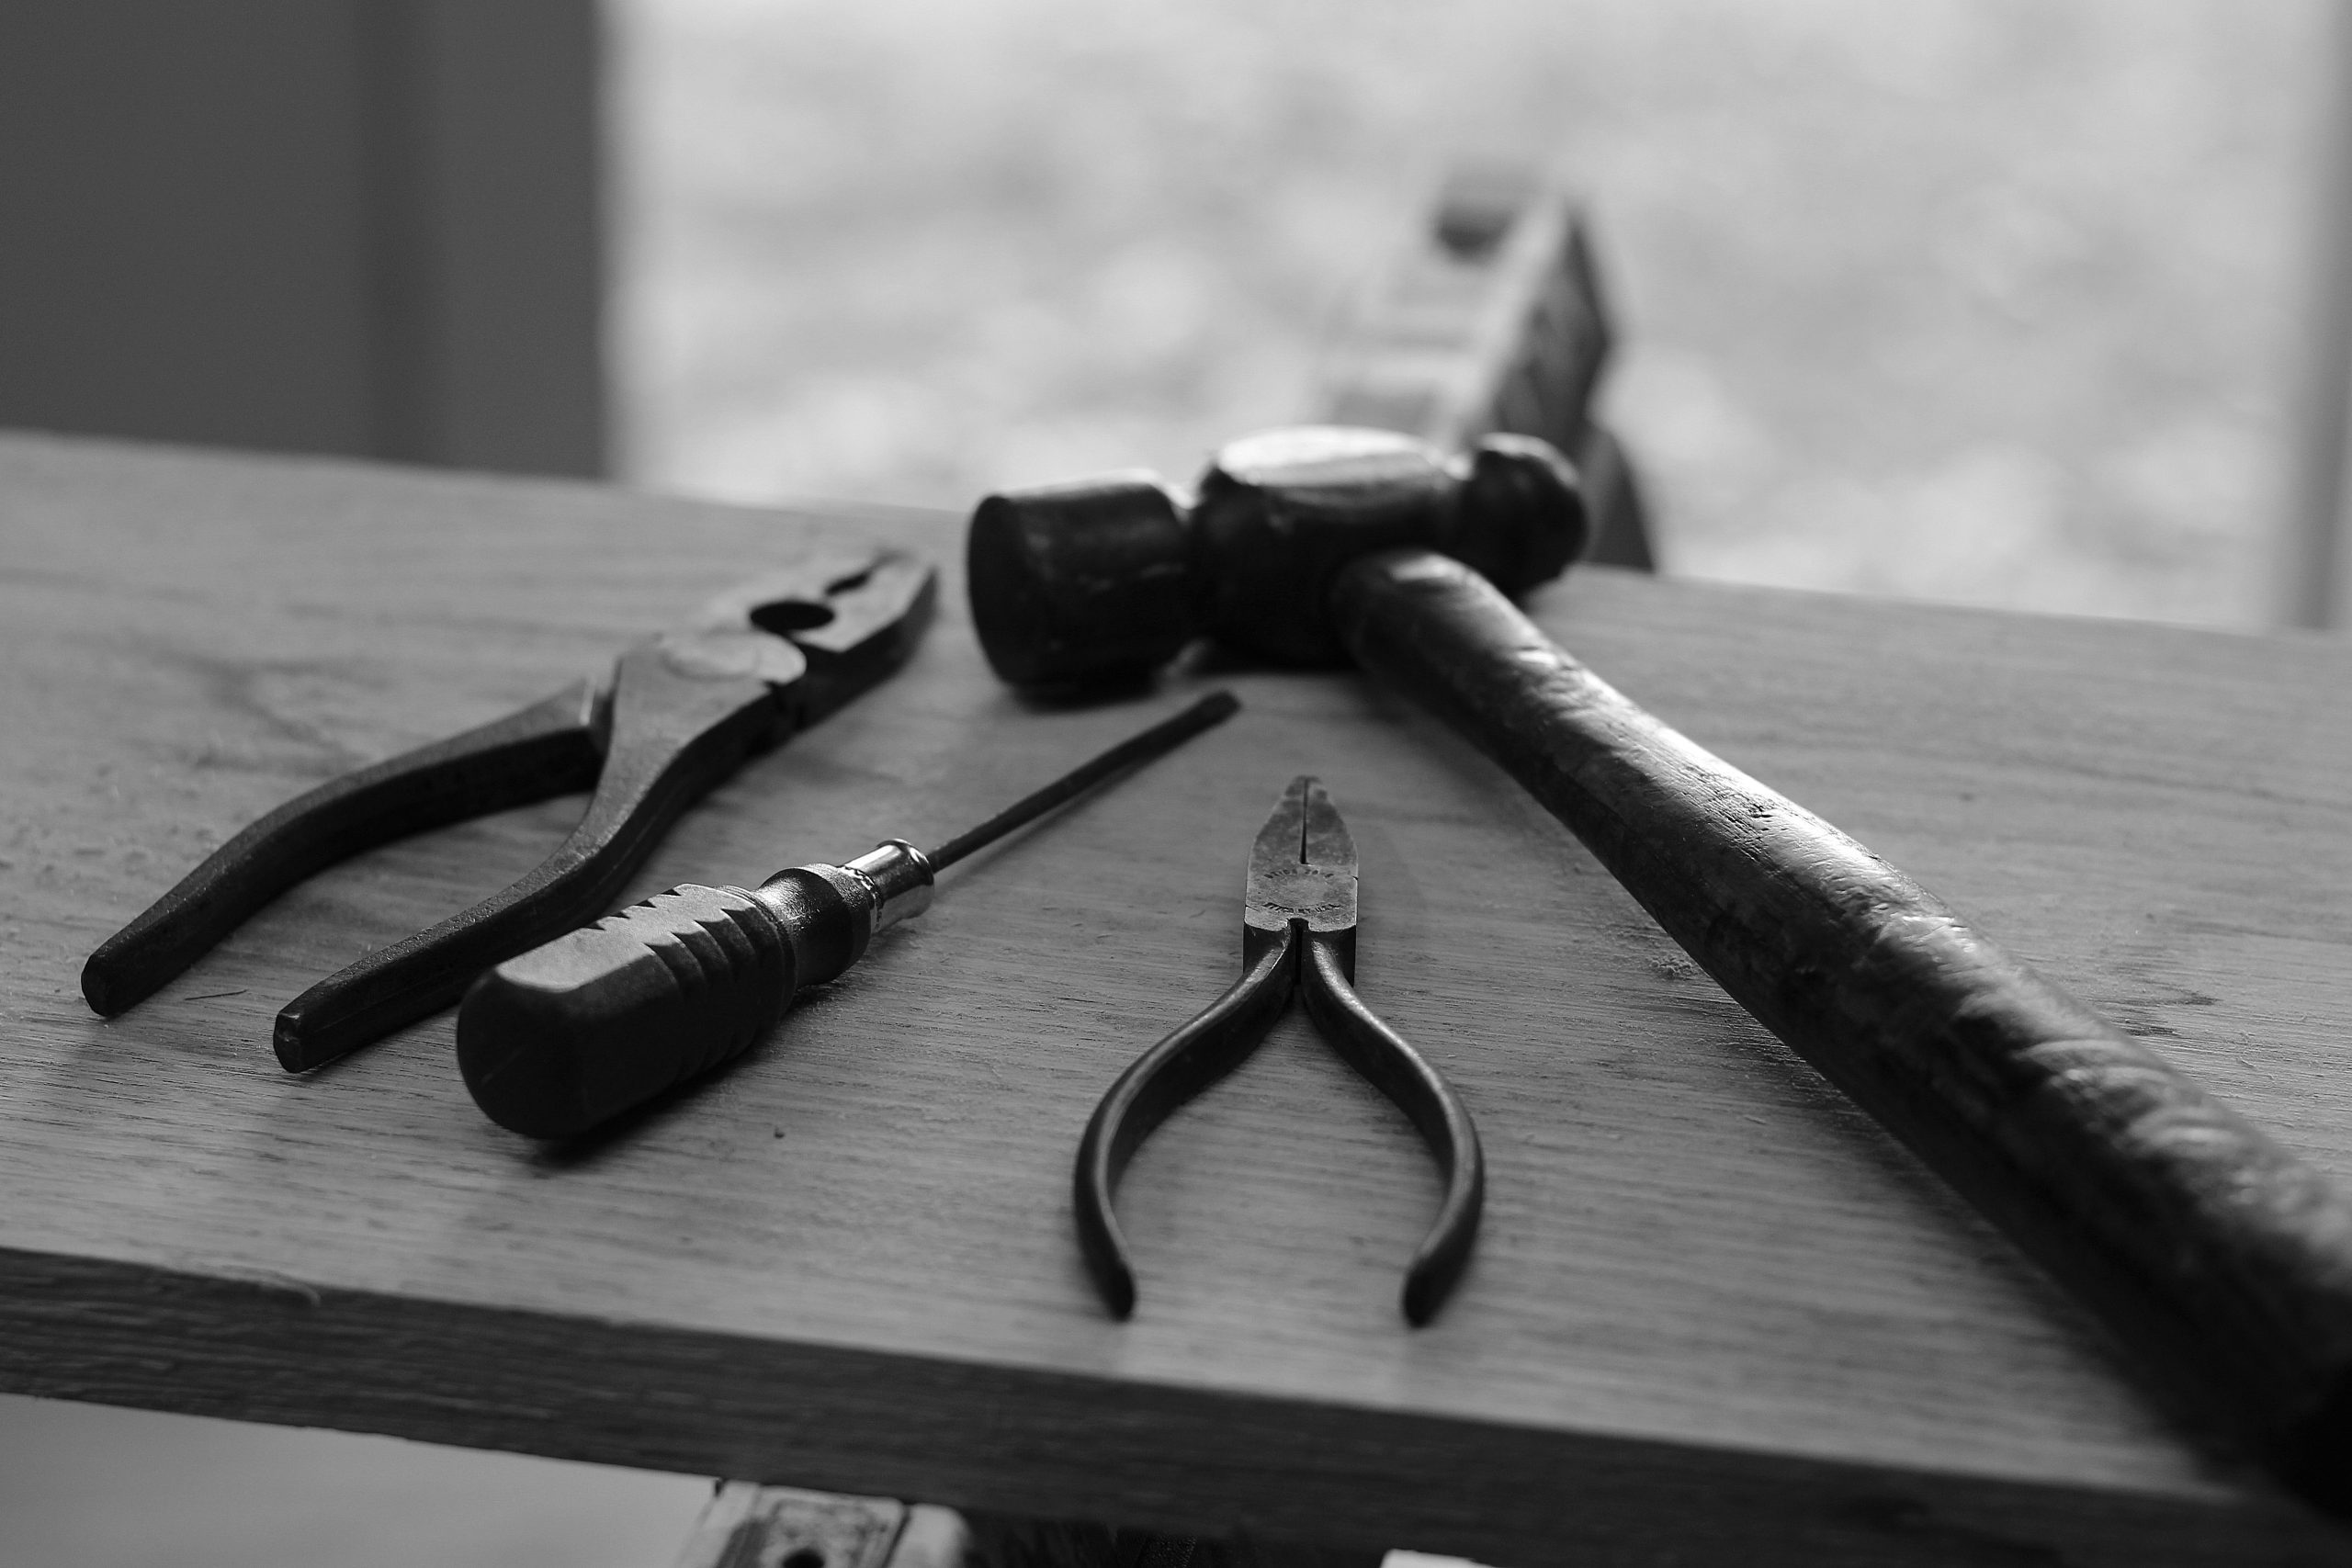 Black and white image of tools on a wooden workbench.